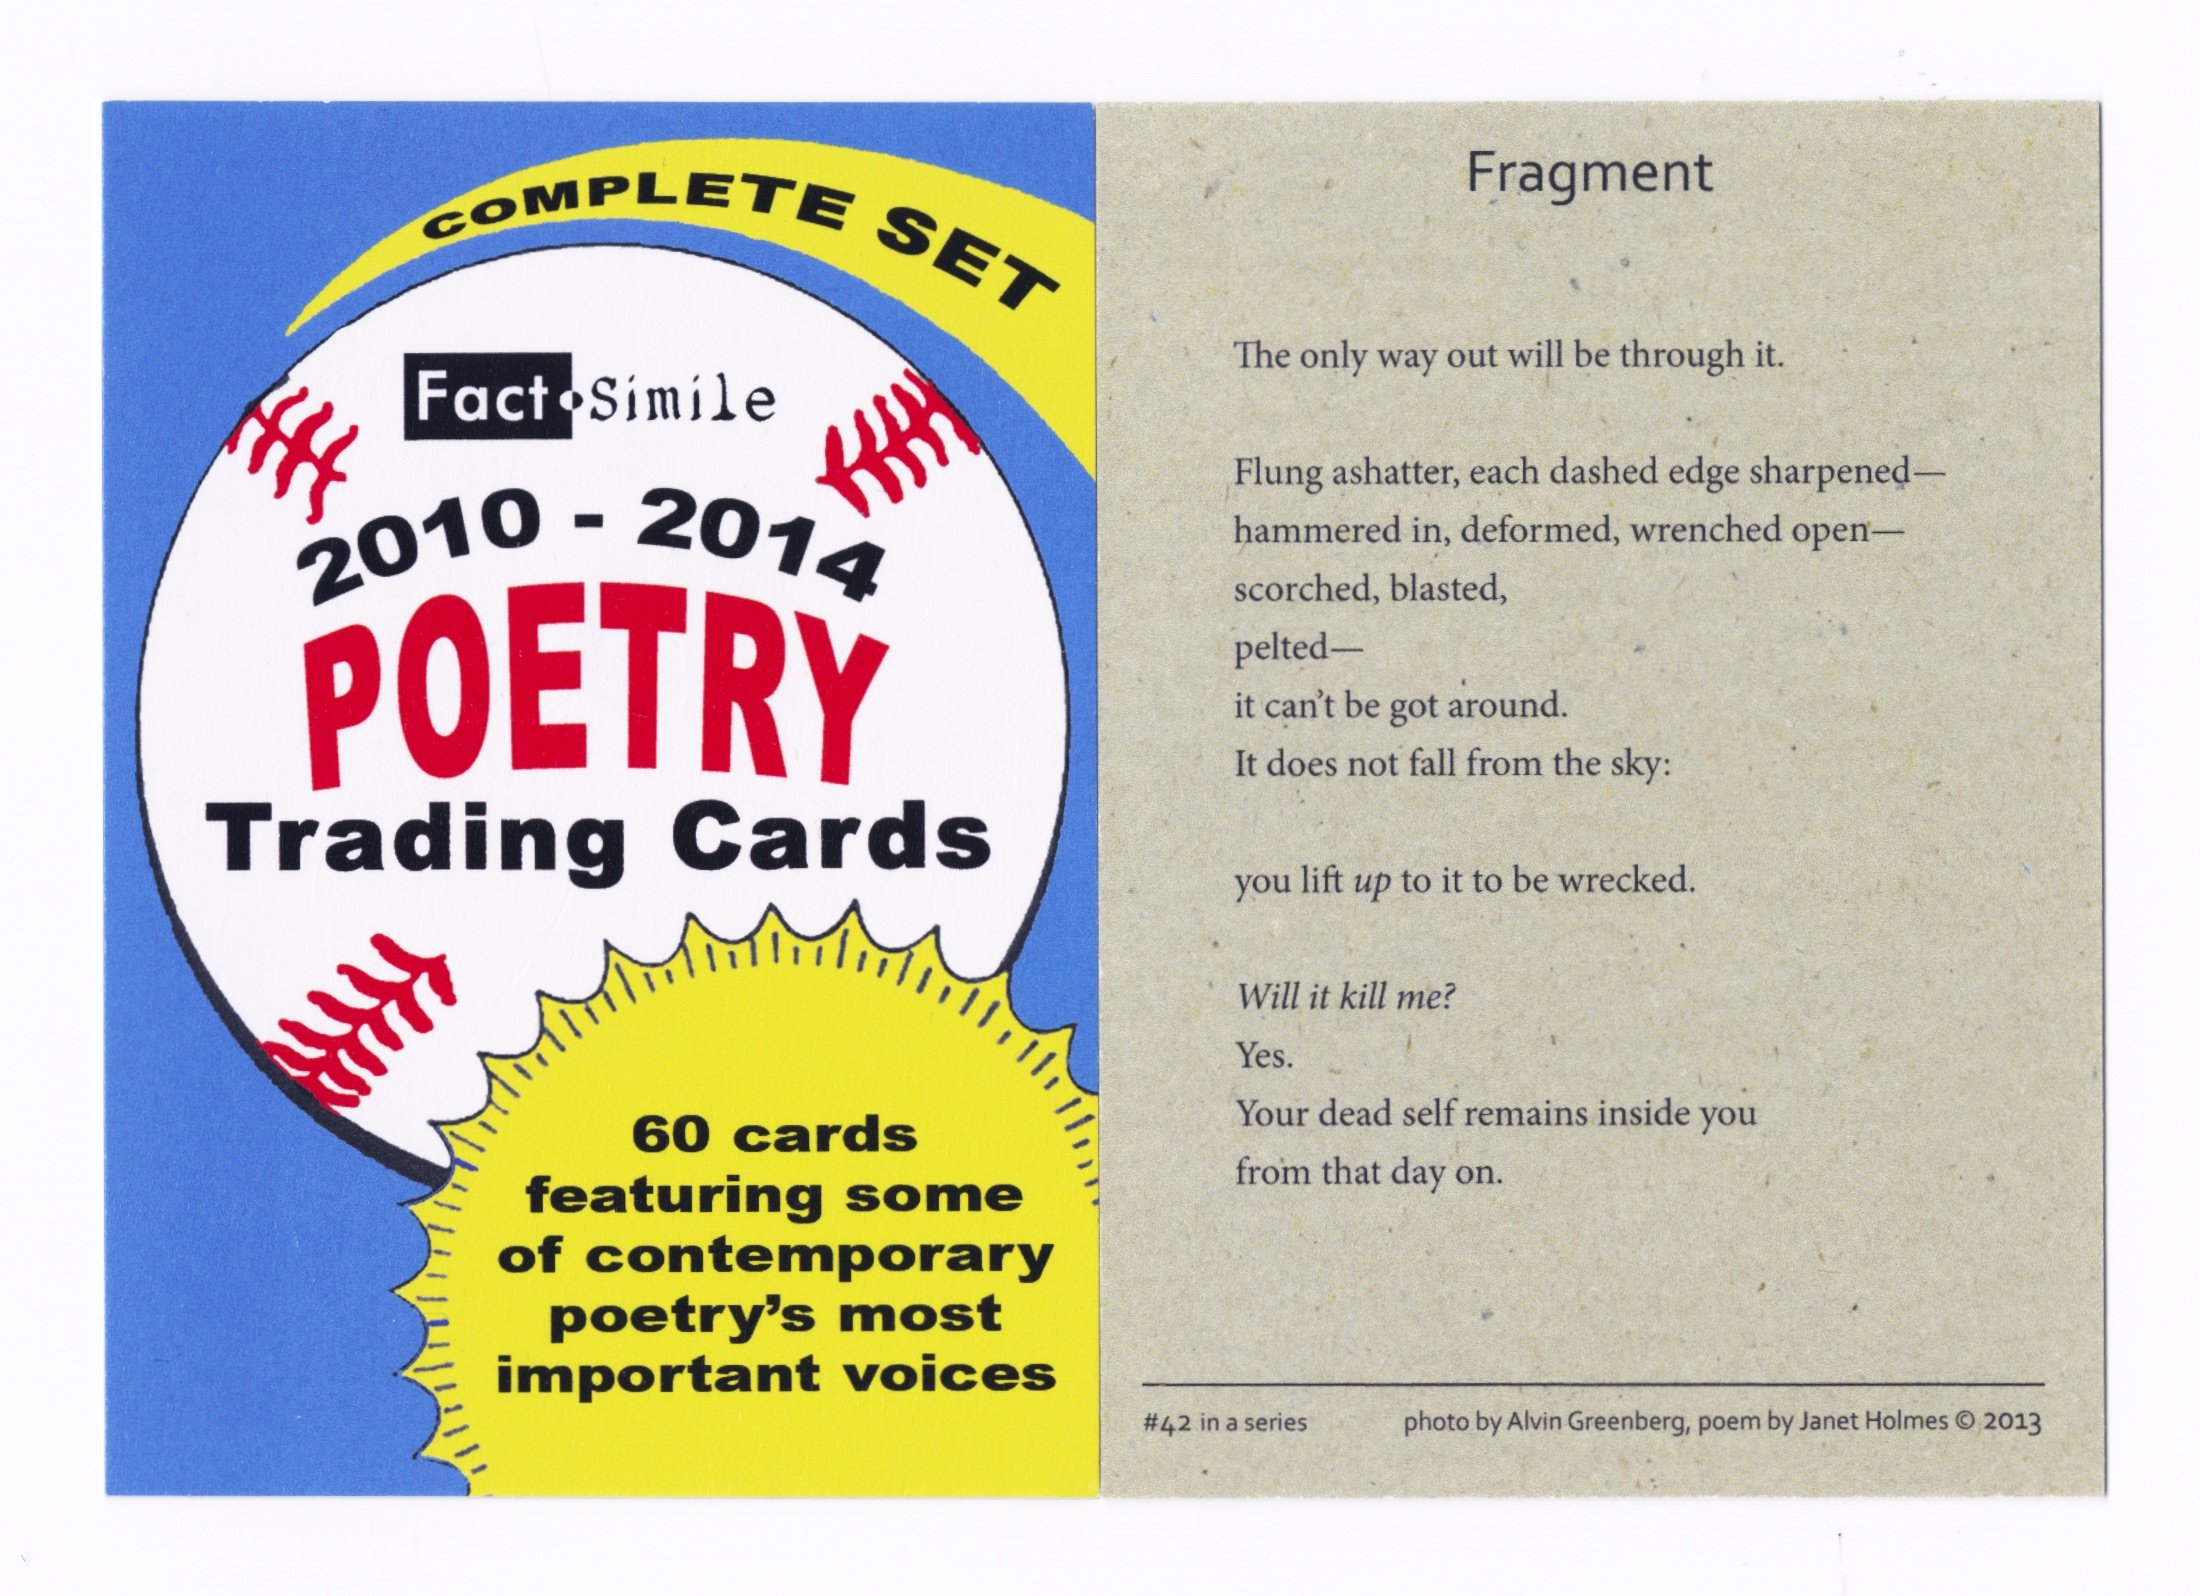 Poetry Trading Cards, with poem, "Fragments," on right-hand side